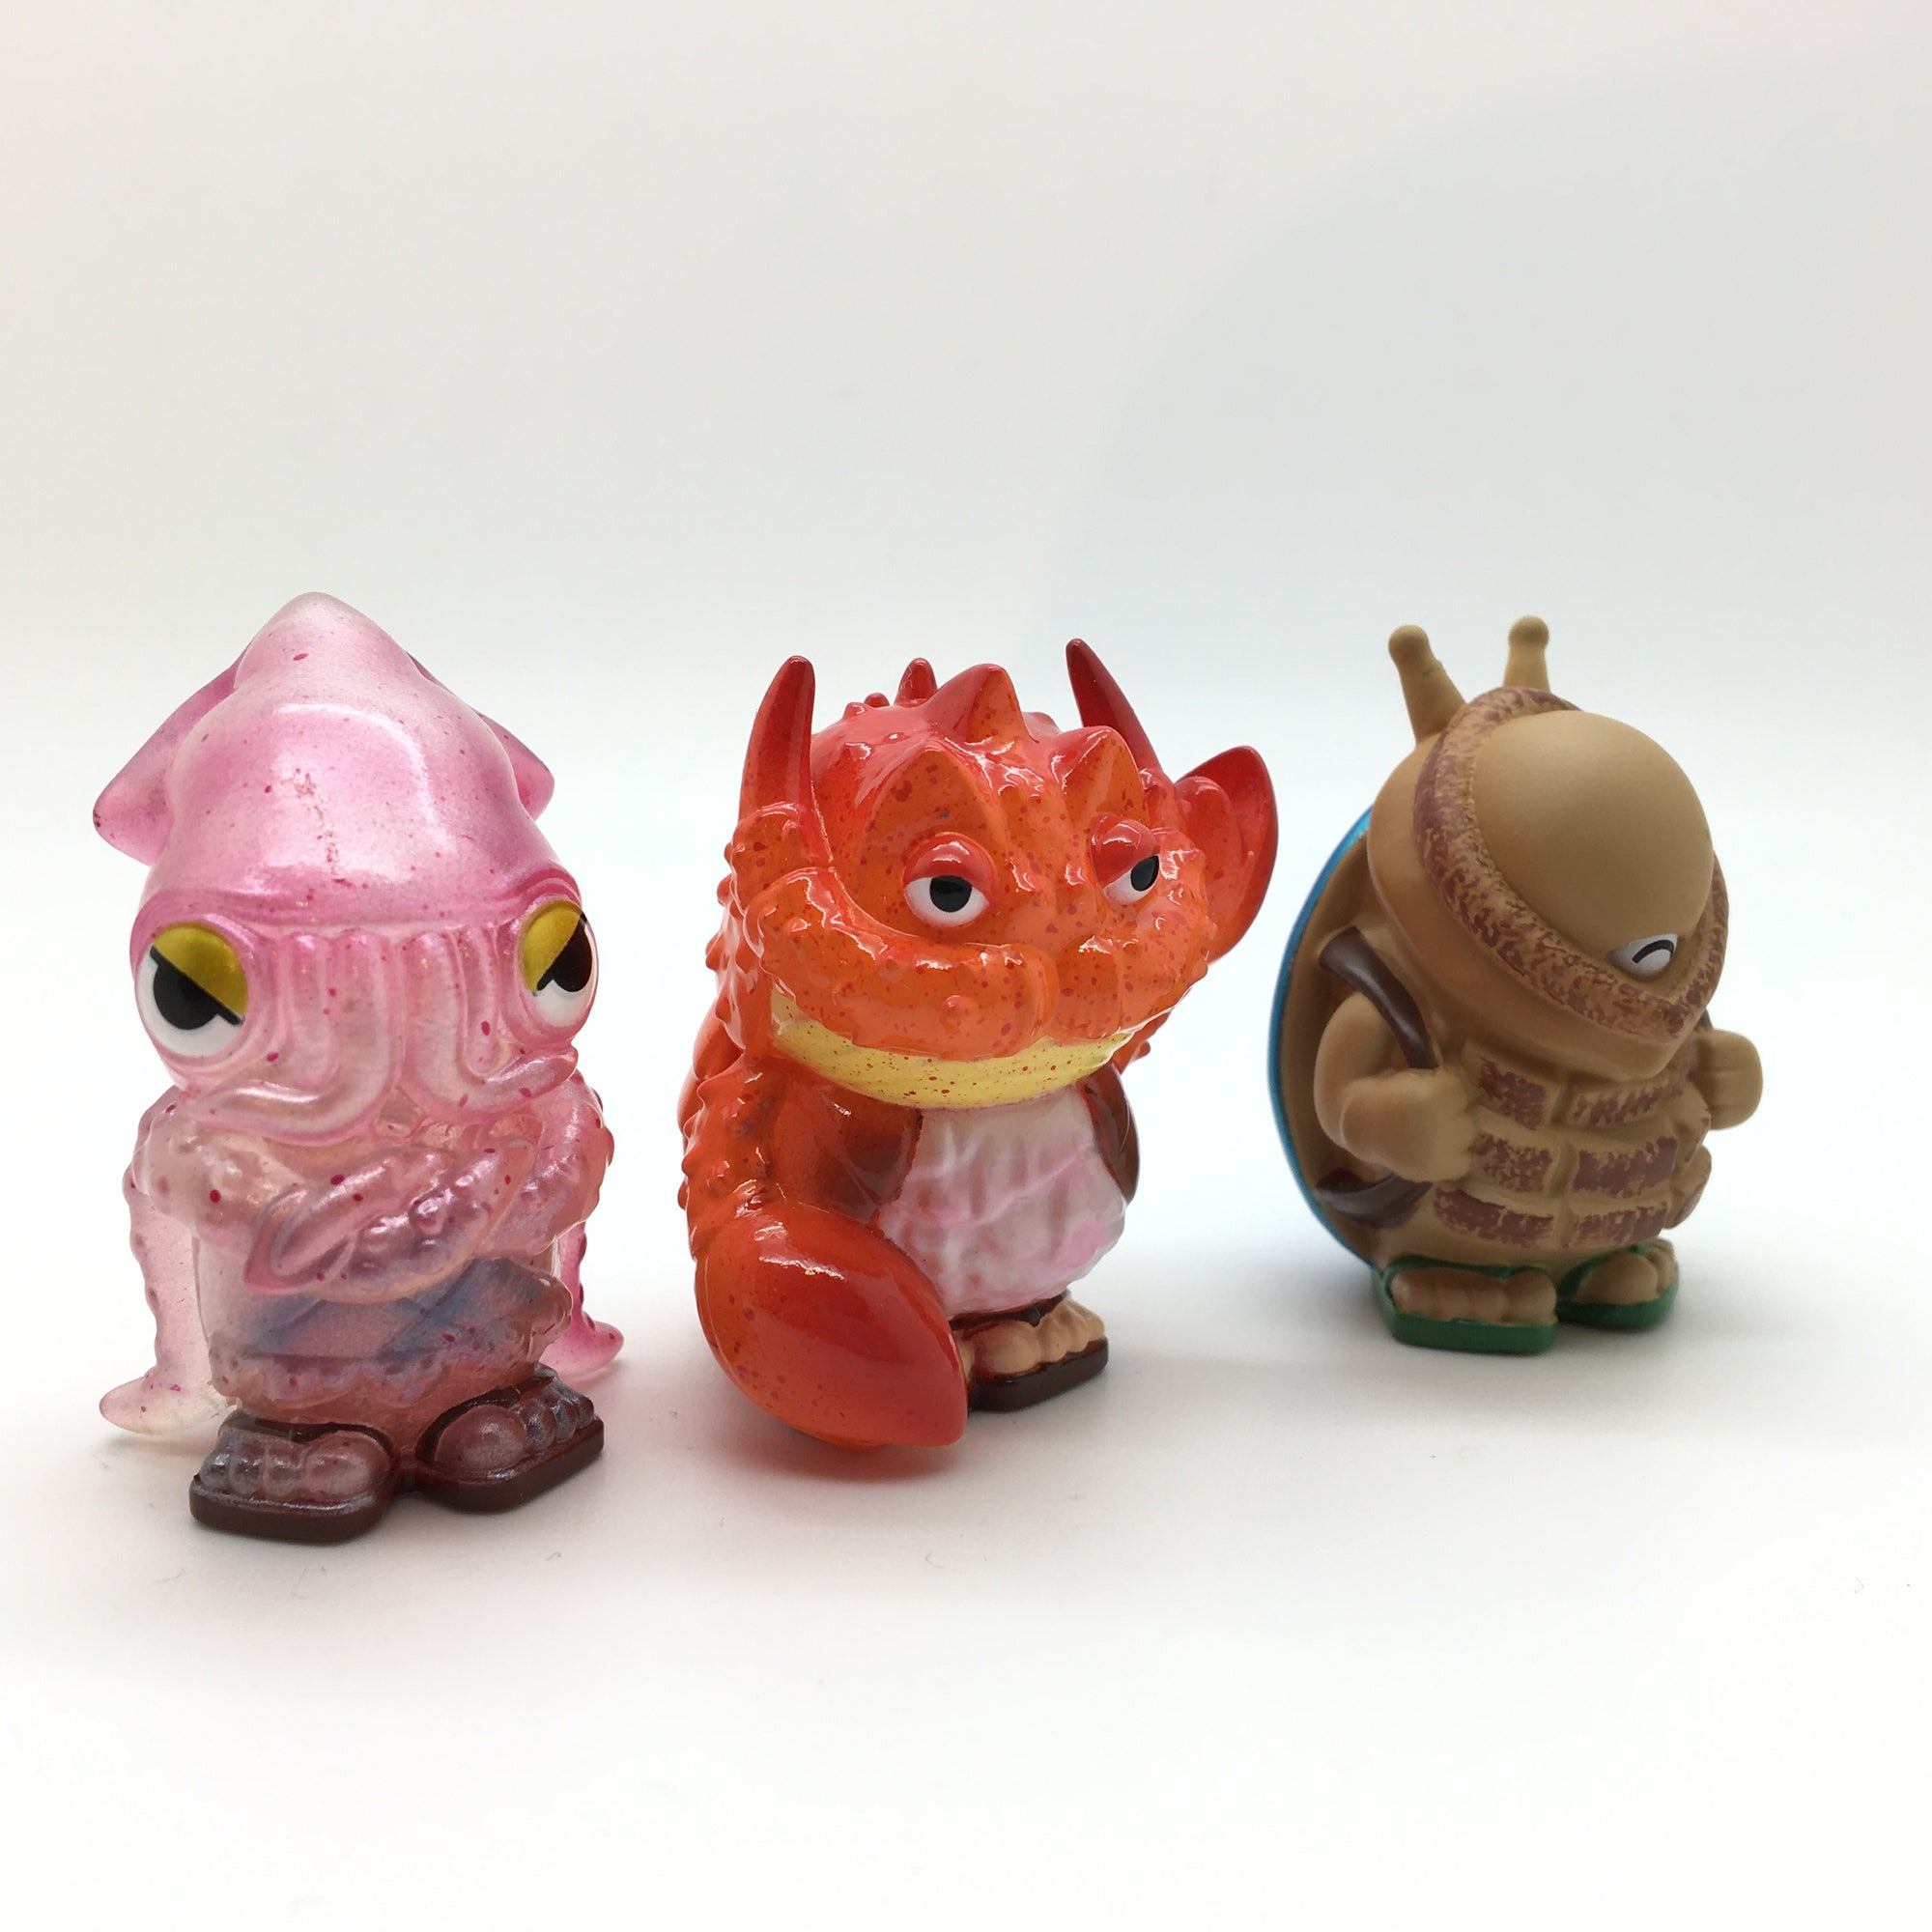 Mame Moyashi Finger Puppet Toy Series 1 by Chino Lam